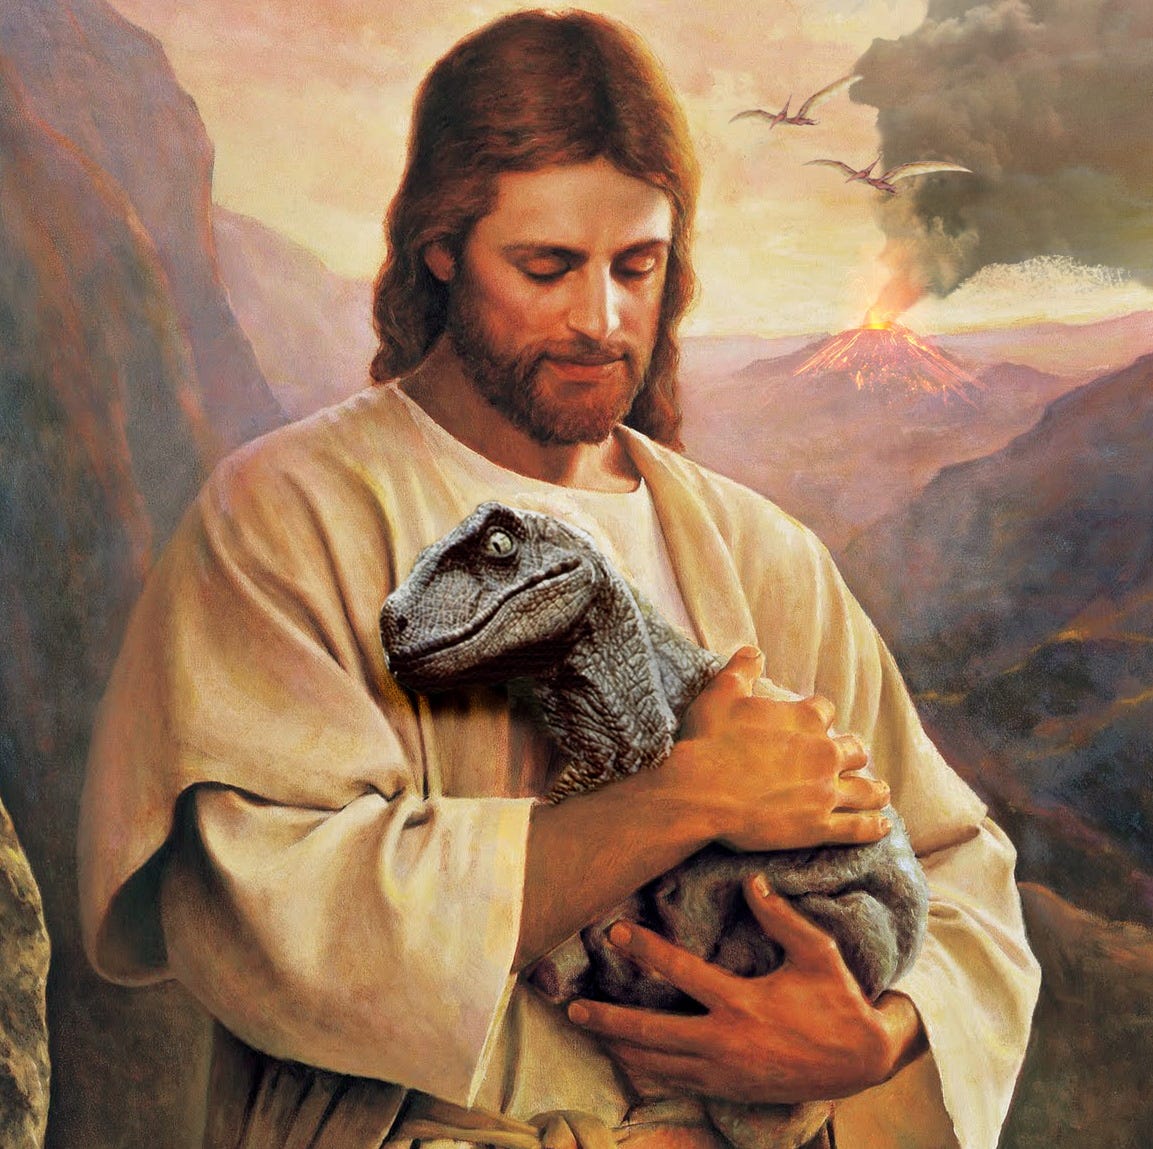 Silly realistic painting of Jesus holding a baby raptor dinosaur.